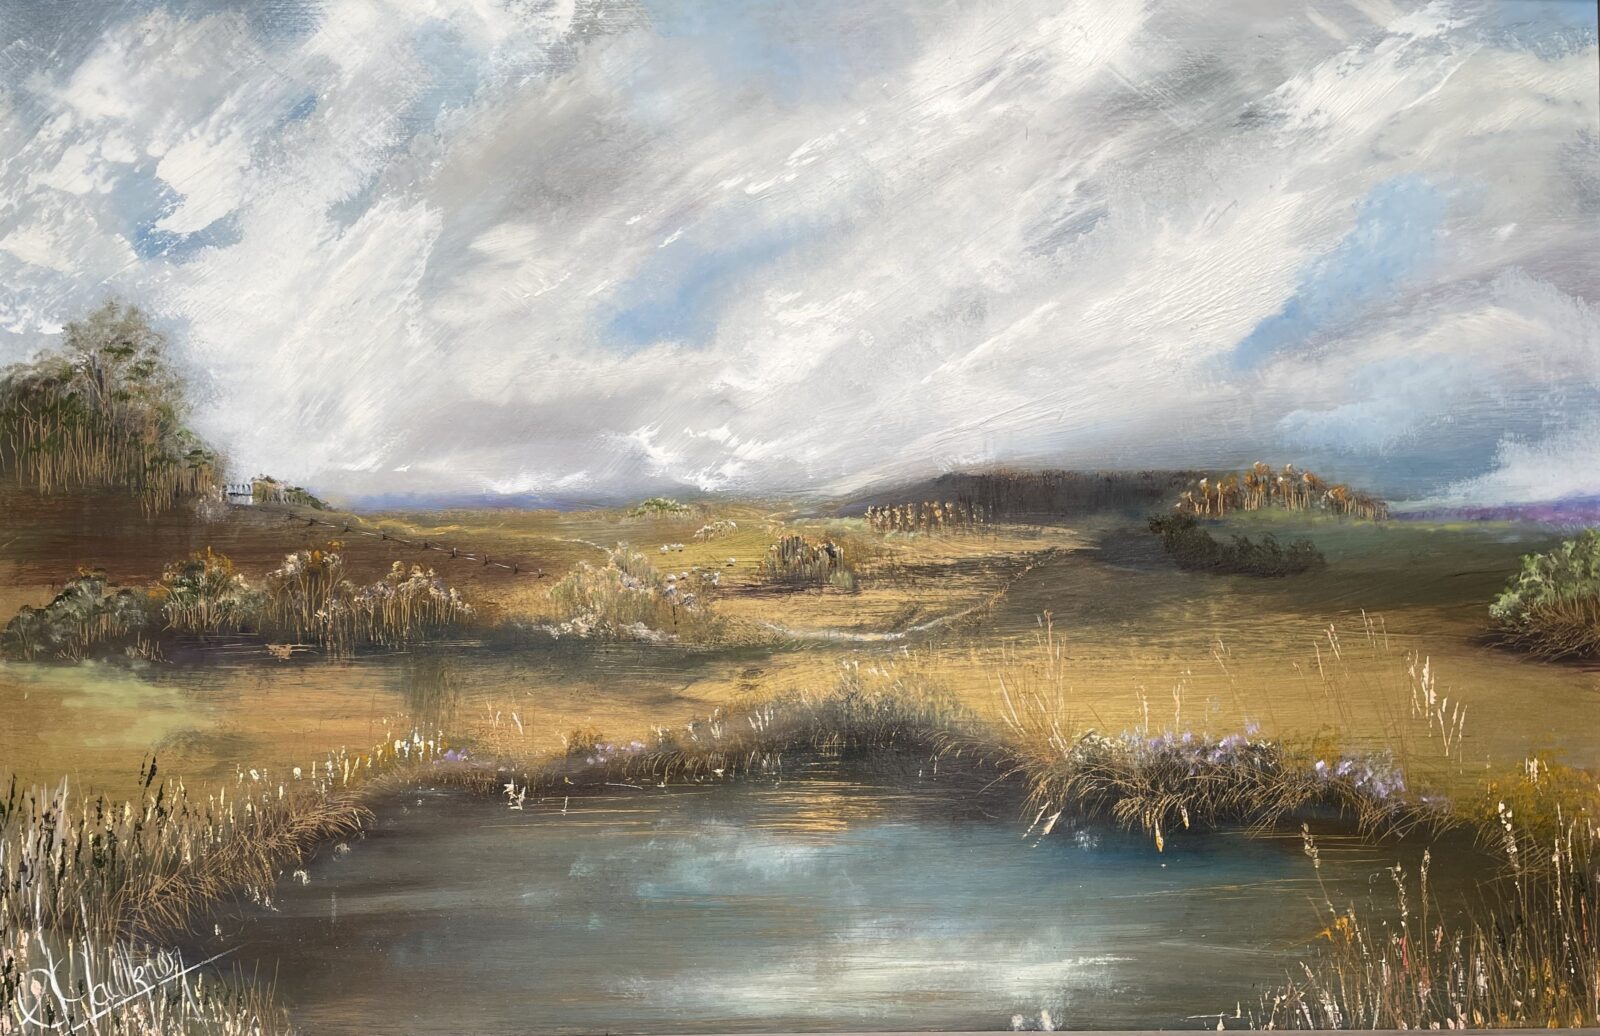 Oil on canvas awarded Highly Commended Murrurundi Art Prize